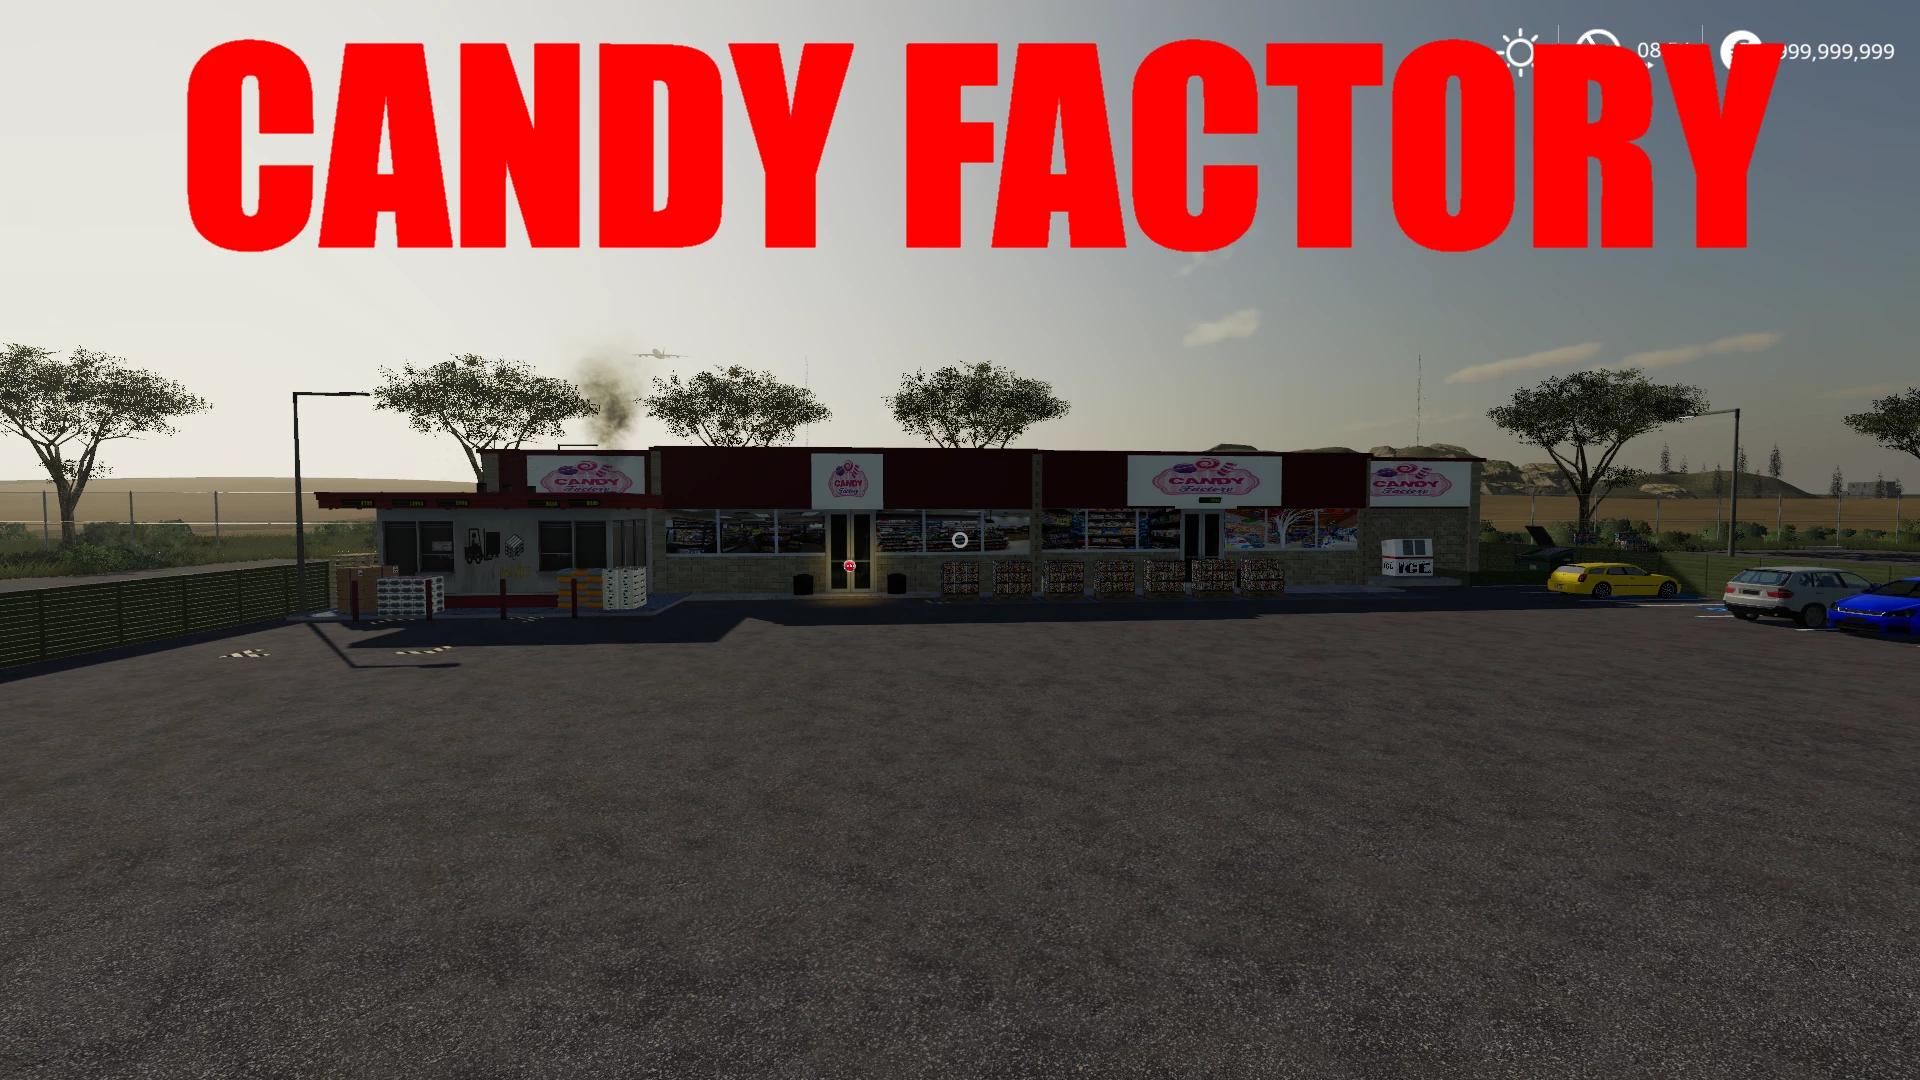 Candy Factory. Карта фабрика Кэнди 2. Candy Factory building. Flour Factory fs19. Фабрика 5 0